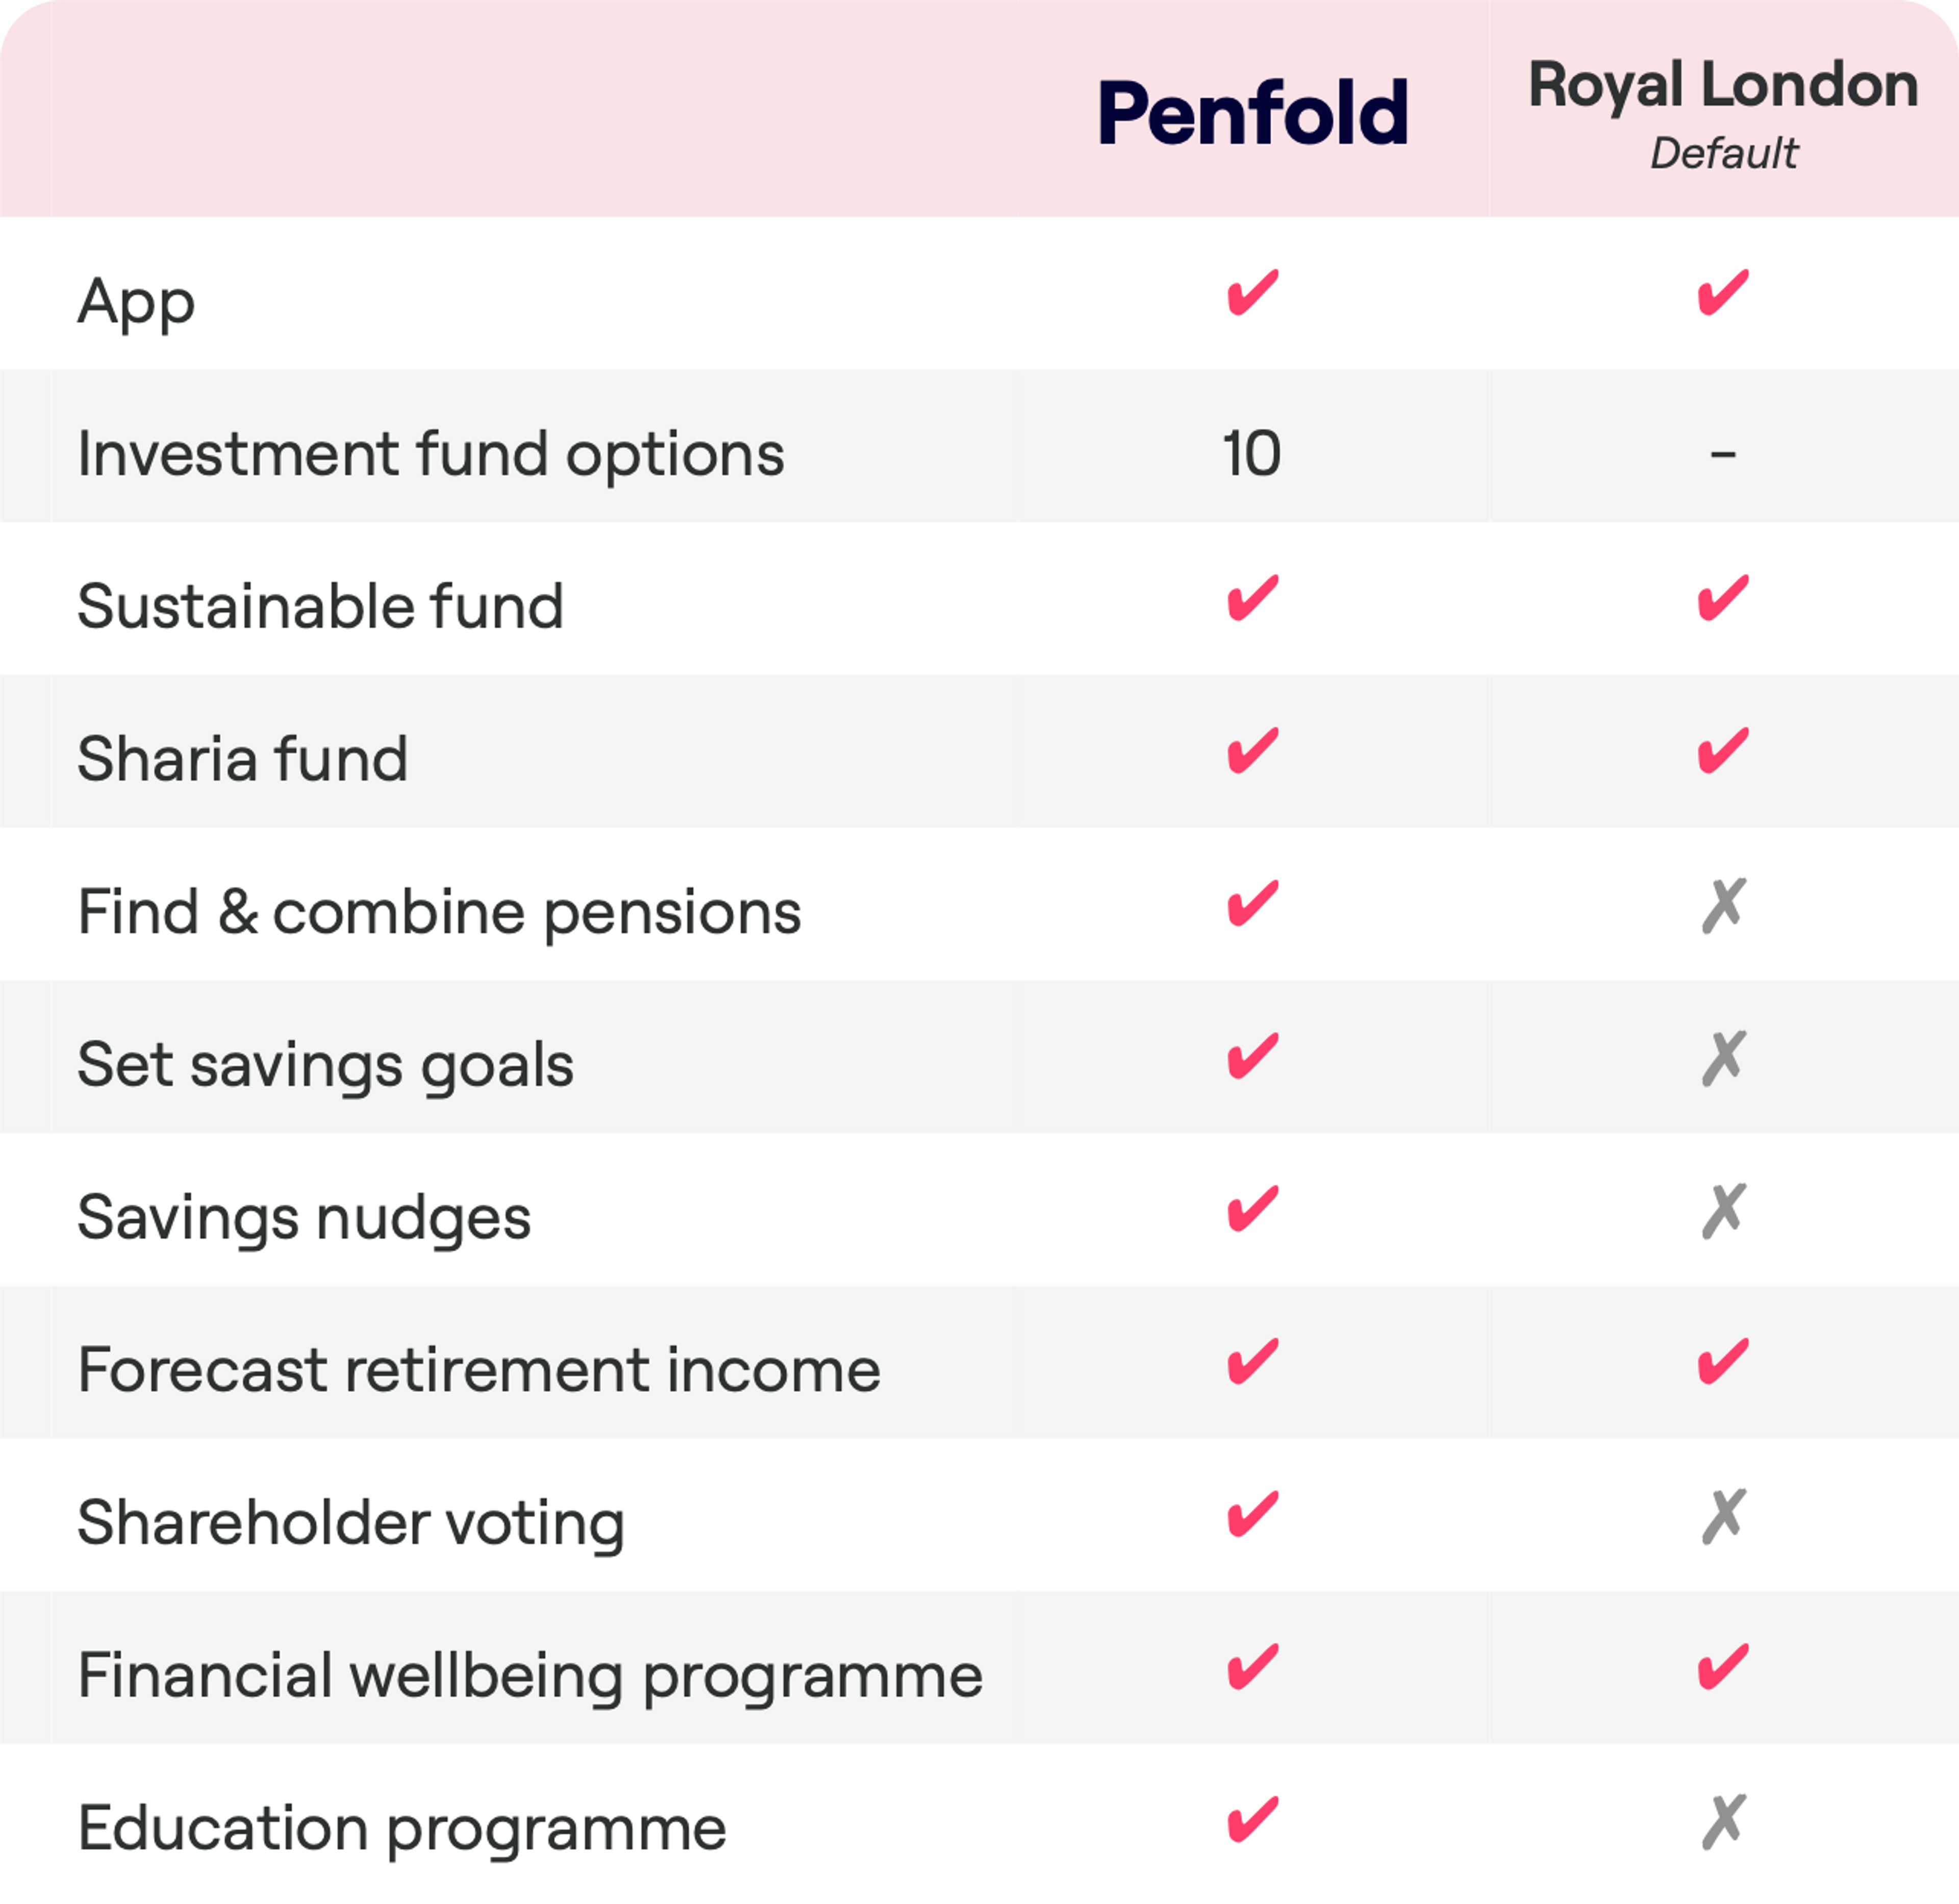 A feature comparison chart for Penfold and Royal London Default pension services. Penfold offers a mobile app, 10 investment fund options, a sustainable fund, a Sharia fund, the ability to find and combine pensions, set savings goals, receive savings nudges, forecast retirement income, participate in shareholder voting, and offers a financial wellbeing and an education programme. Royal London Default provides a mobile app, a sustainable fund, a Sharia fund, and a financial wellbeing programme, but does not offer the other features provided by Penfold.